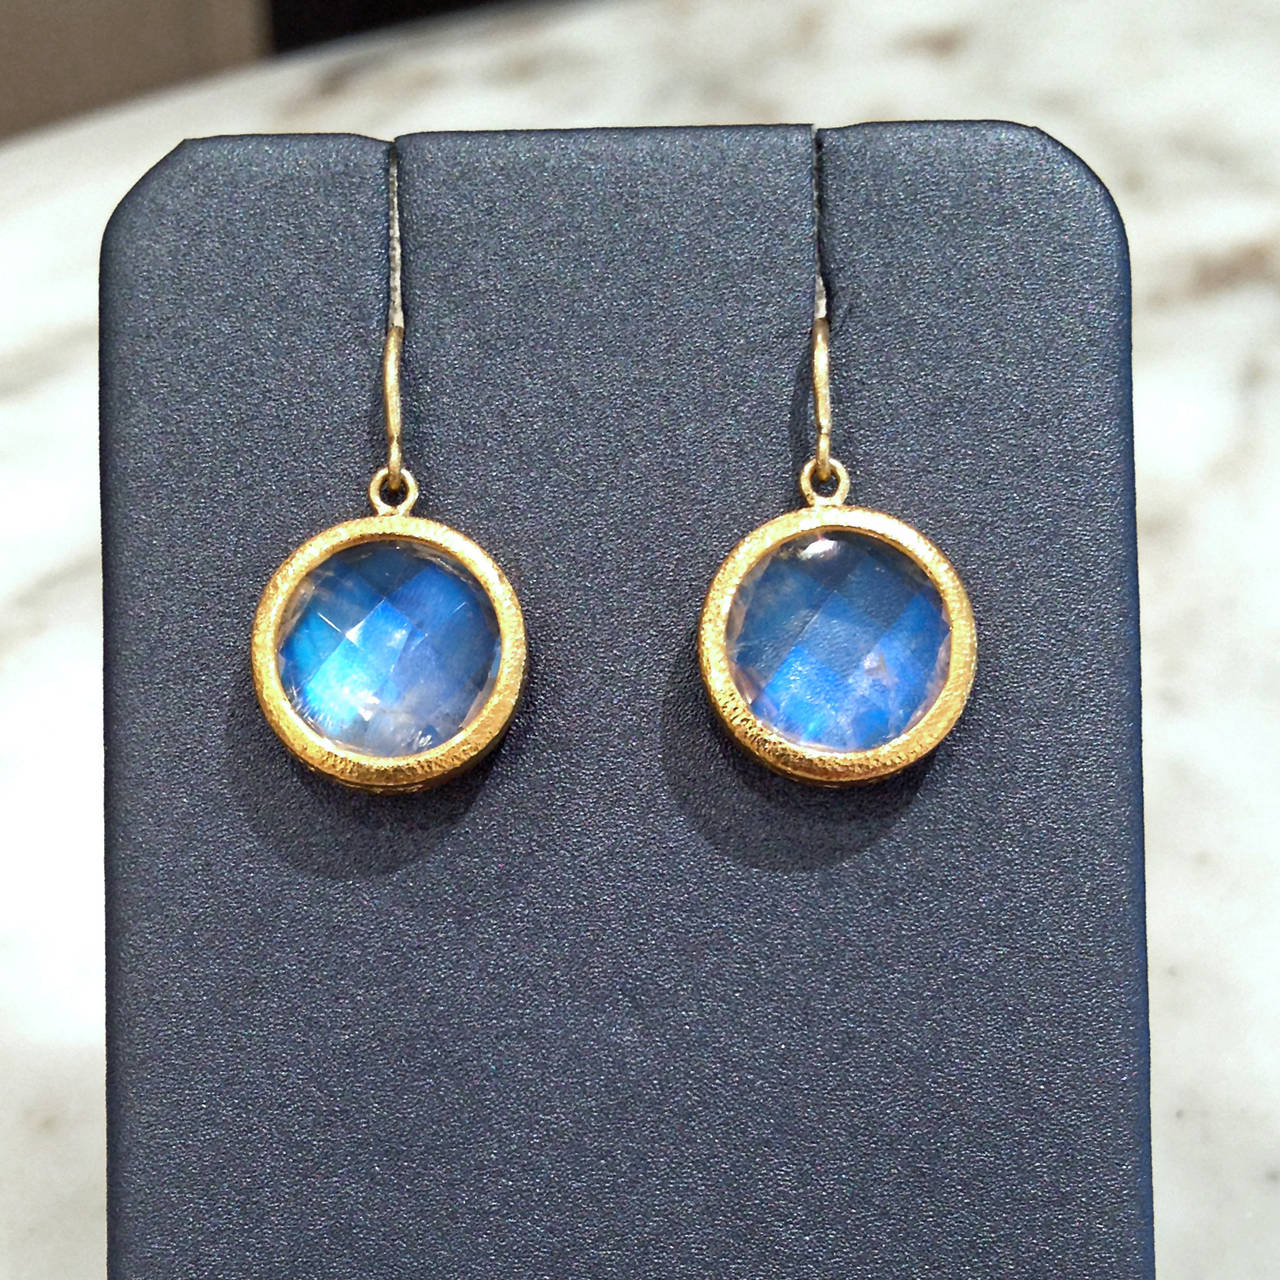 One of a Kind Earrings handcrafted in 22k yellow gold with two phenomenal round checker-cut blue moonstones.